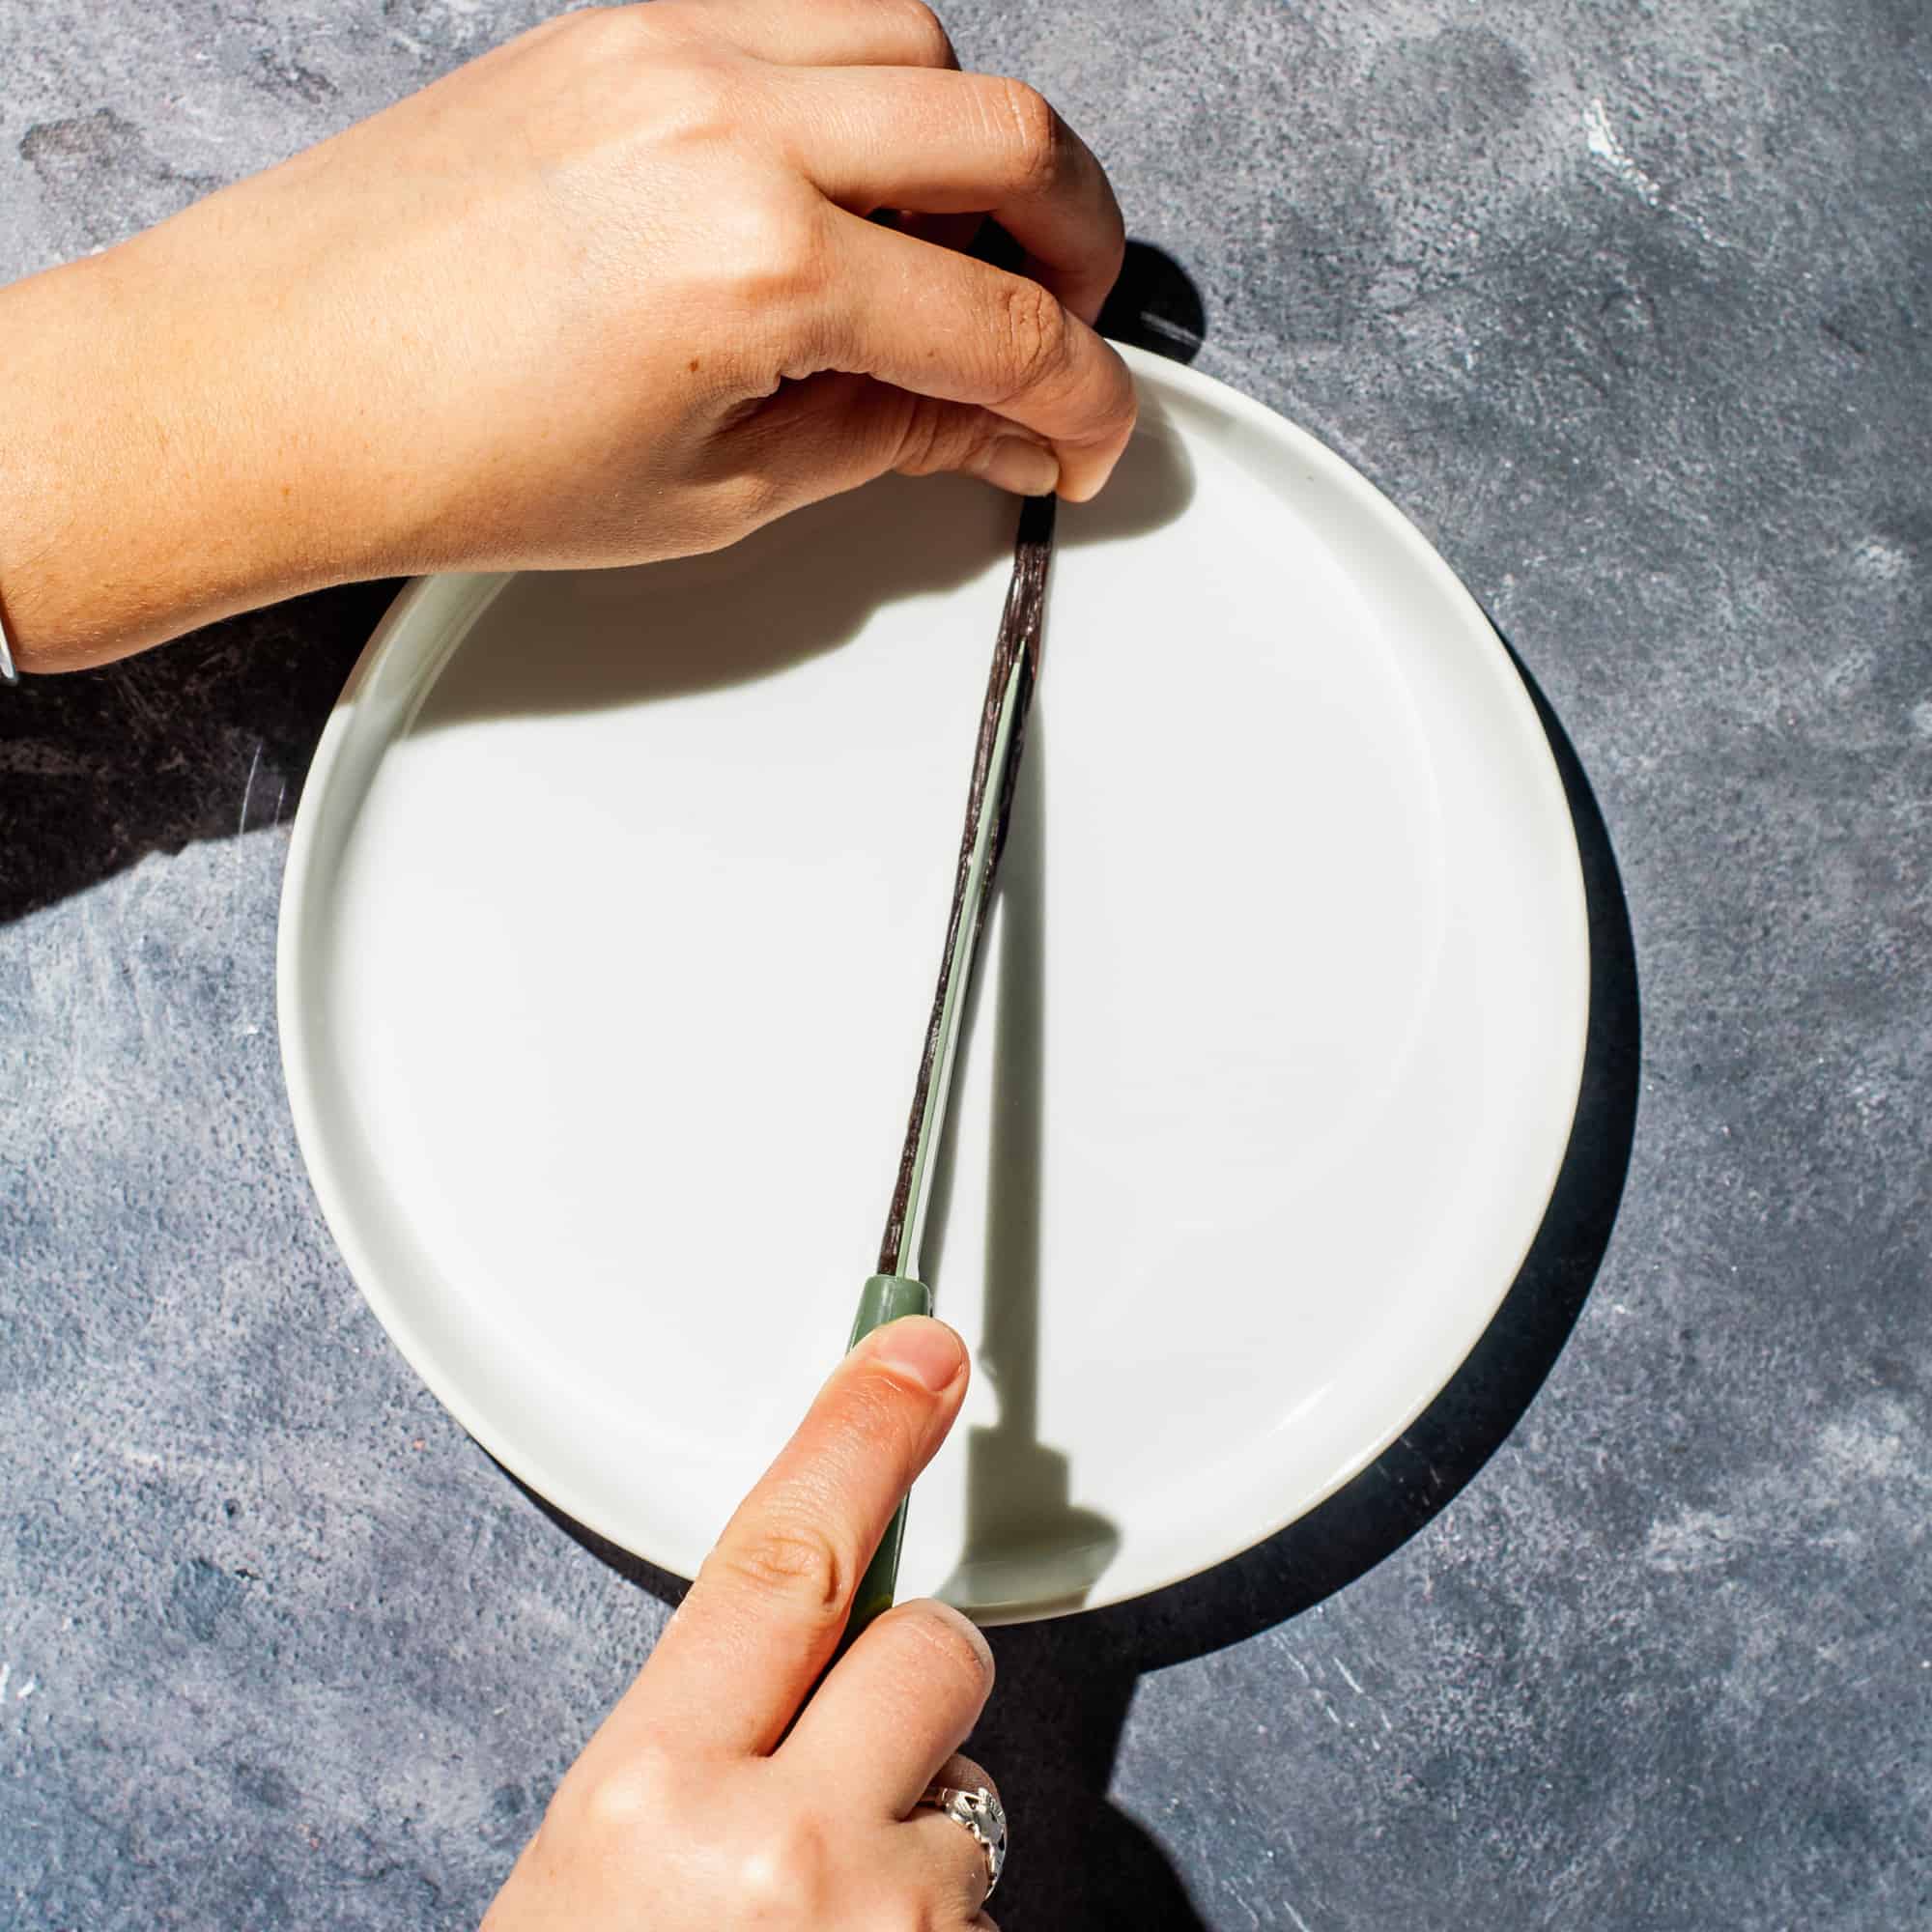 Hands slicing a vanilla bean lengthwise down the center with a paring knife on a white plate